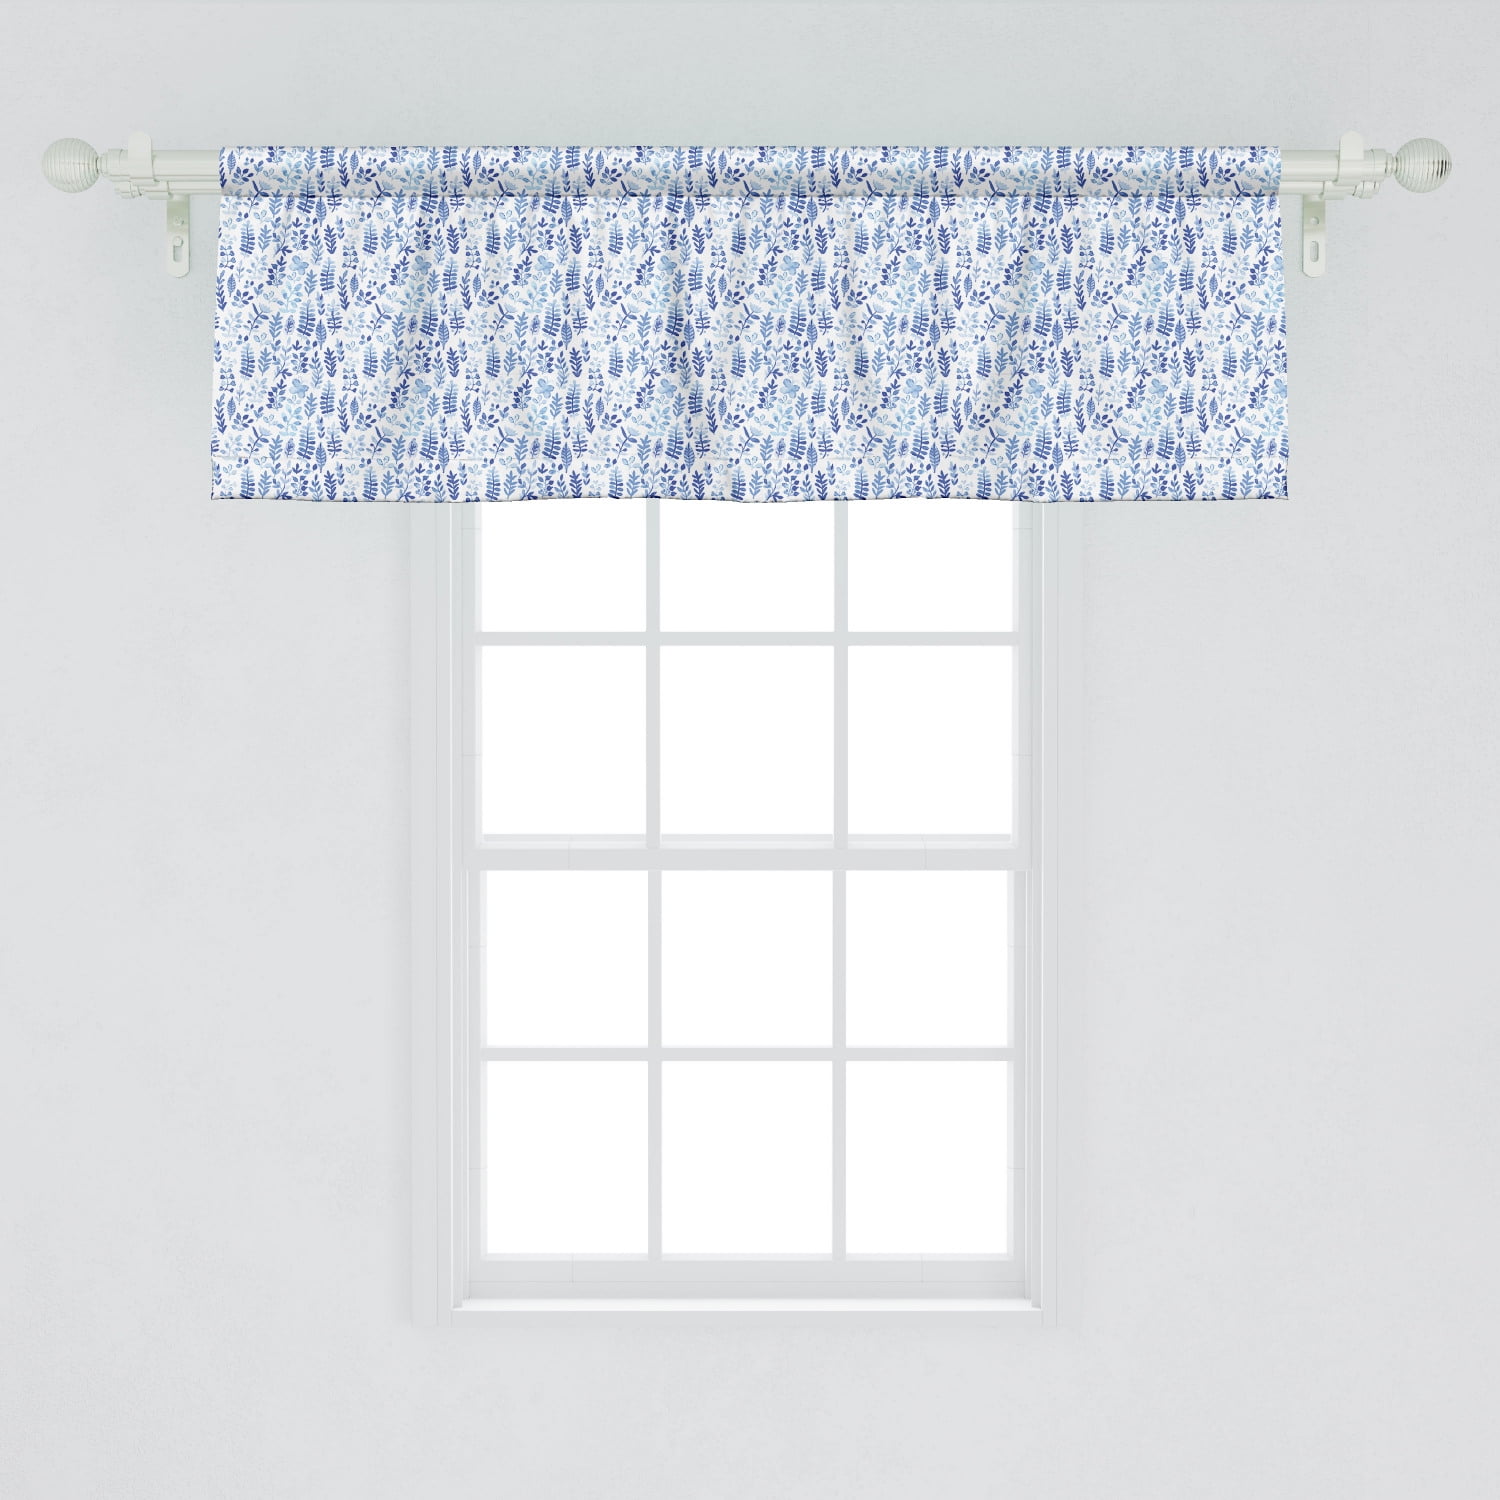 Ambesonne Blue and White Window Valance, Watercolor Style Herbs Fresh Nature Meadow Field Pattern, Valance for Kitchen Bedroom Decor with Rod Pocket, 54" X 18", Violet Blue Baby Blue - Walmart.com